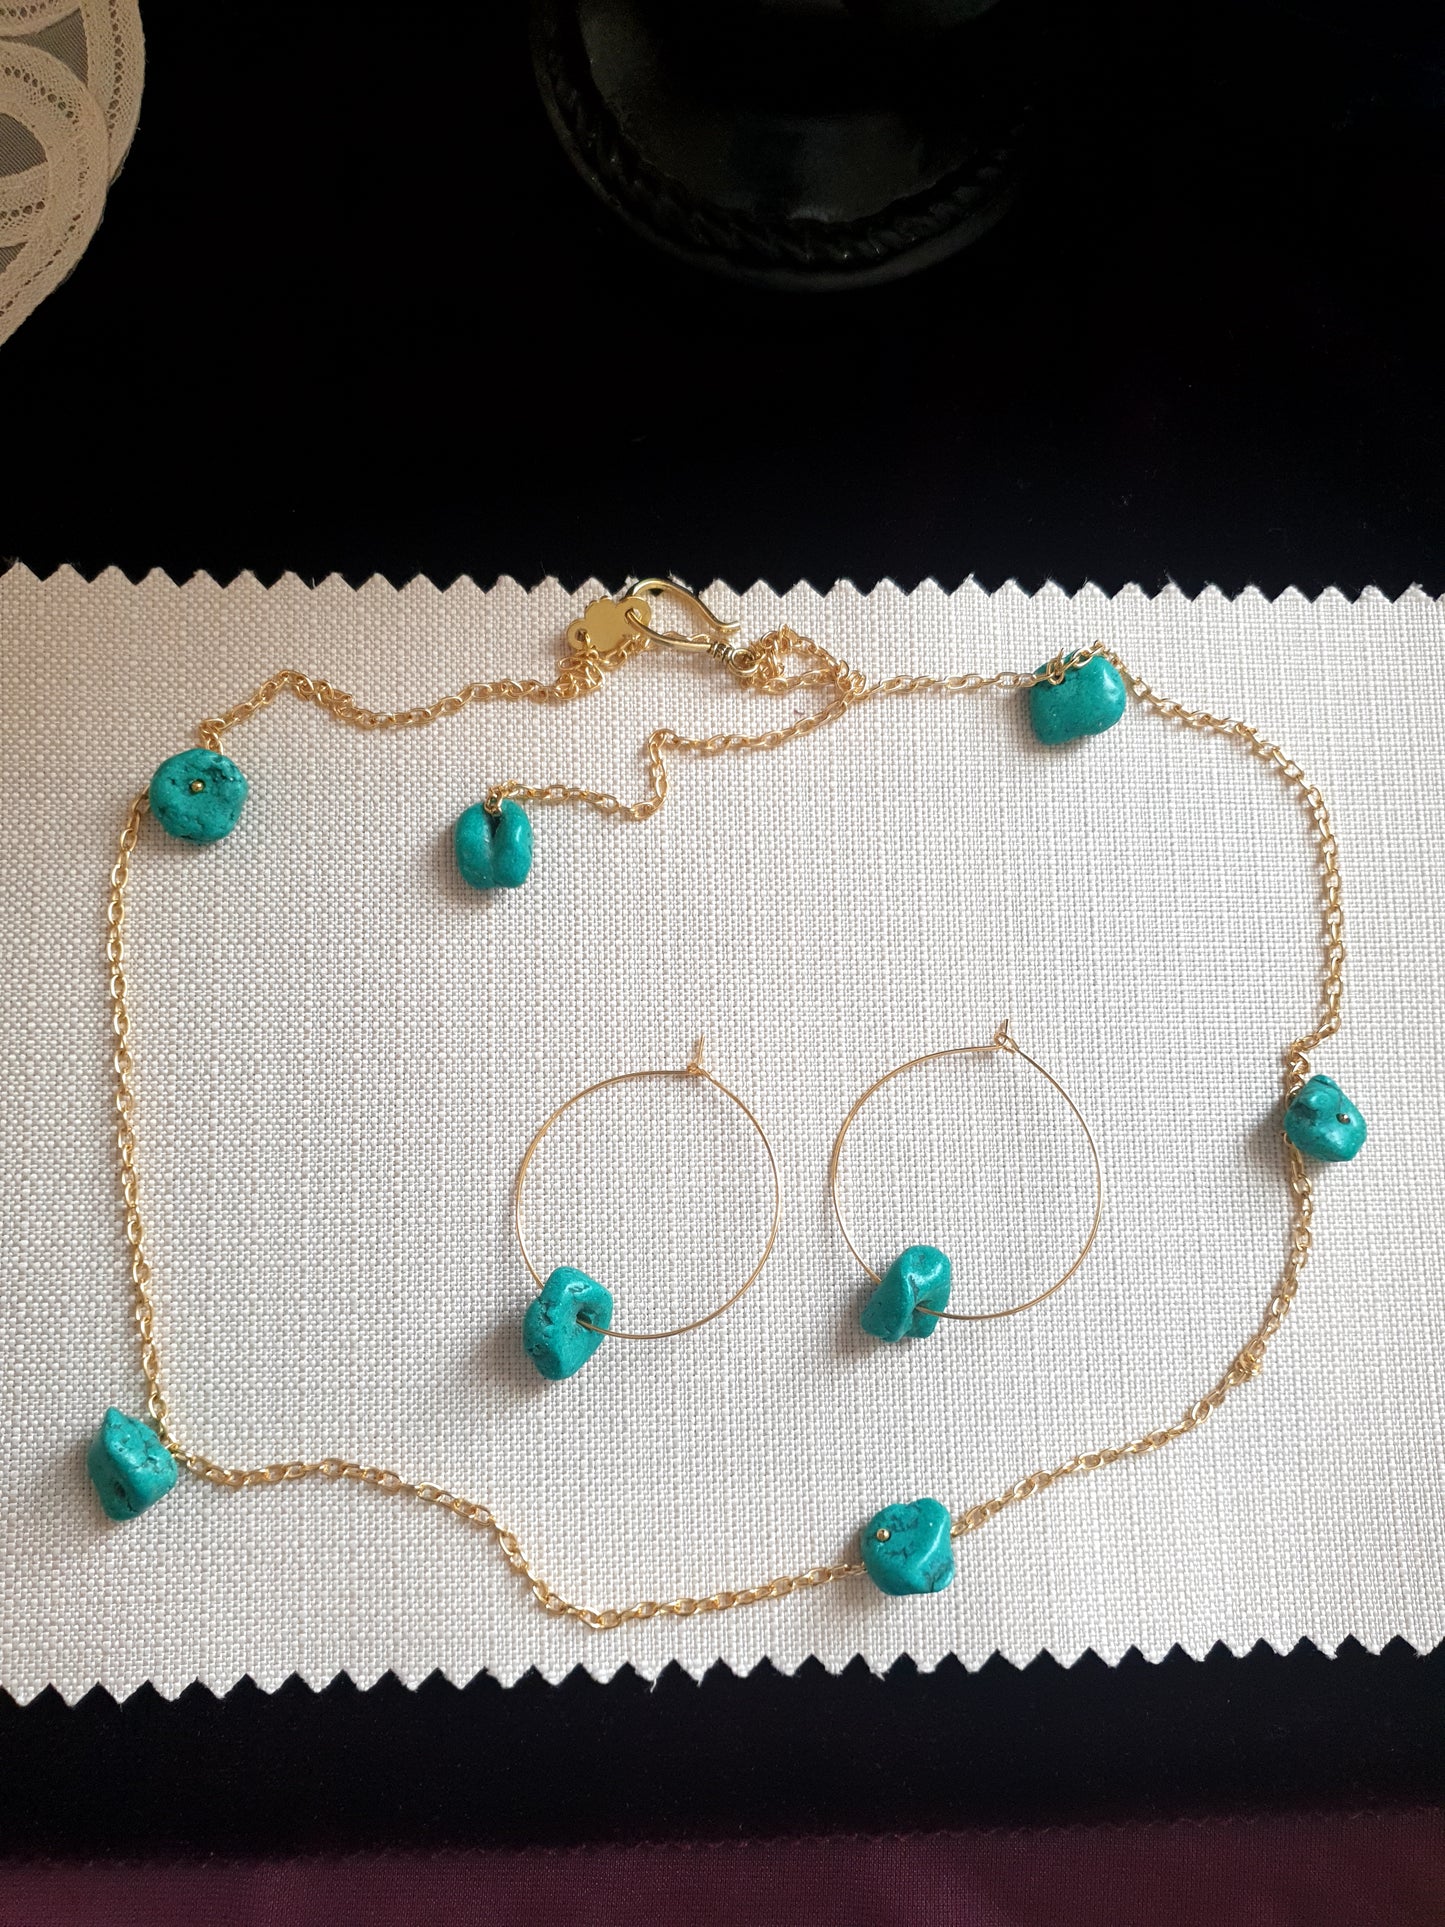 The simple Blue Green Necklace